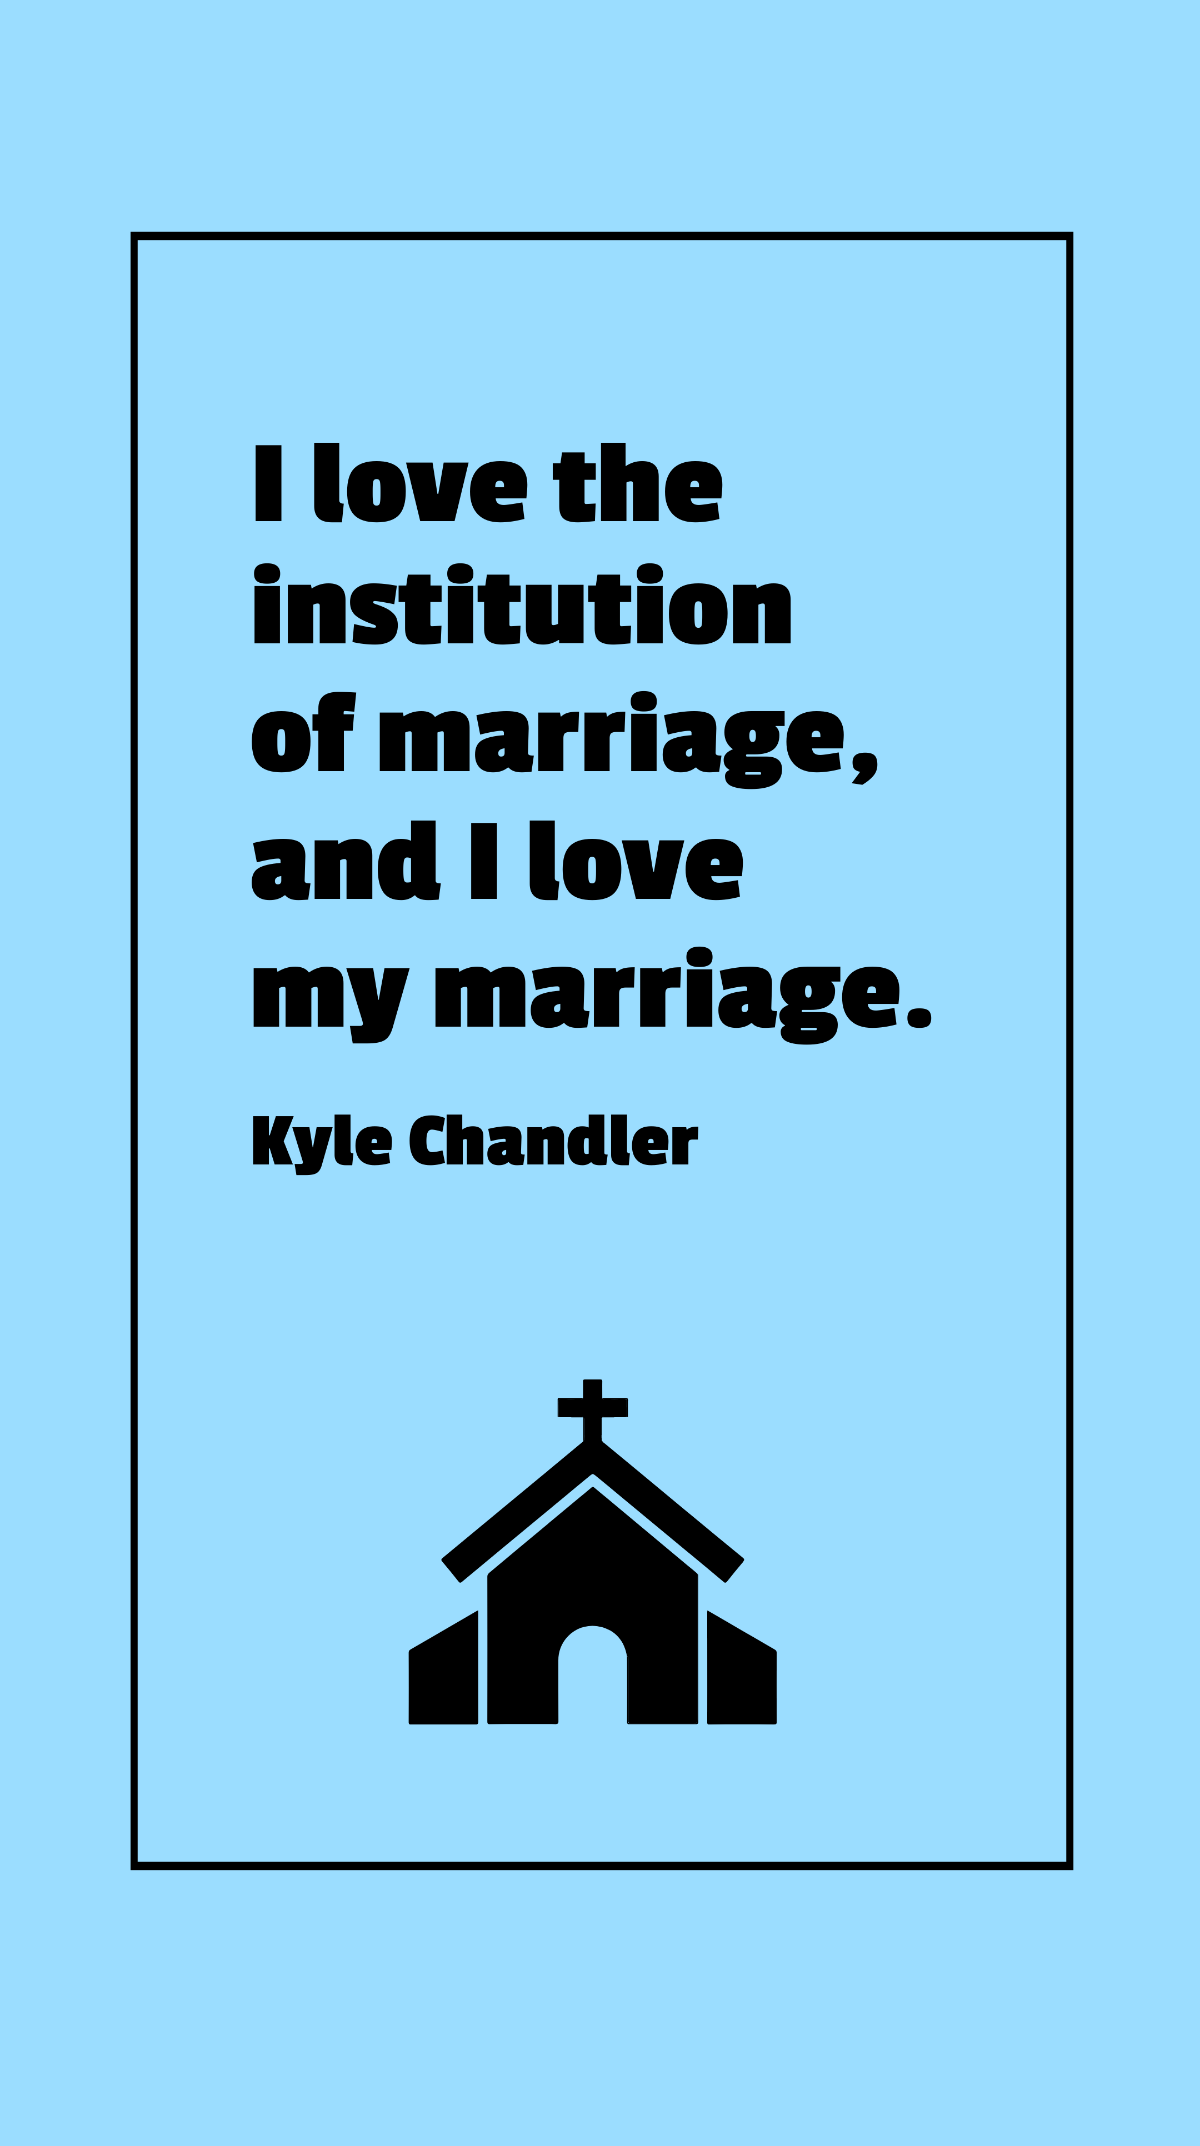 Kyle Chandler - I love the institution of marriage, and I love my marriage. Template